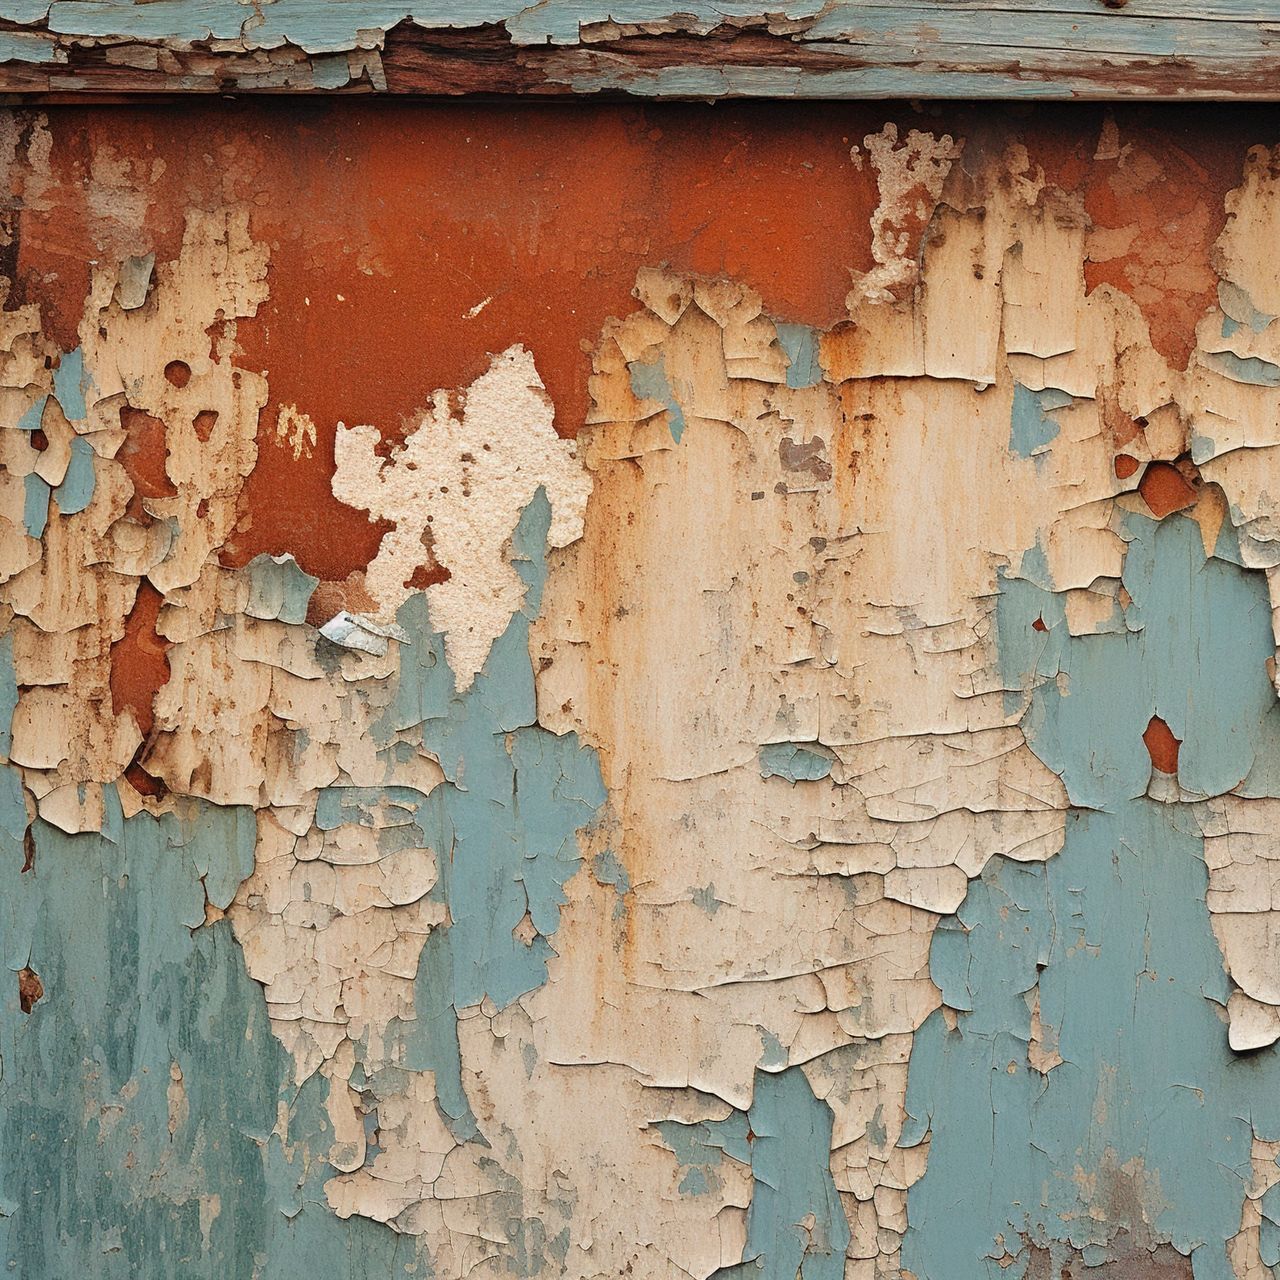 A close up of peeling paint on a wall